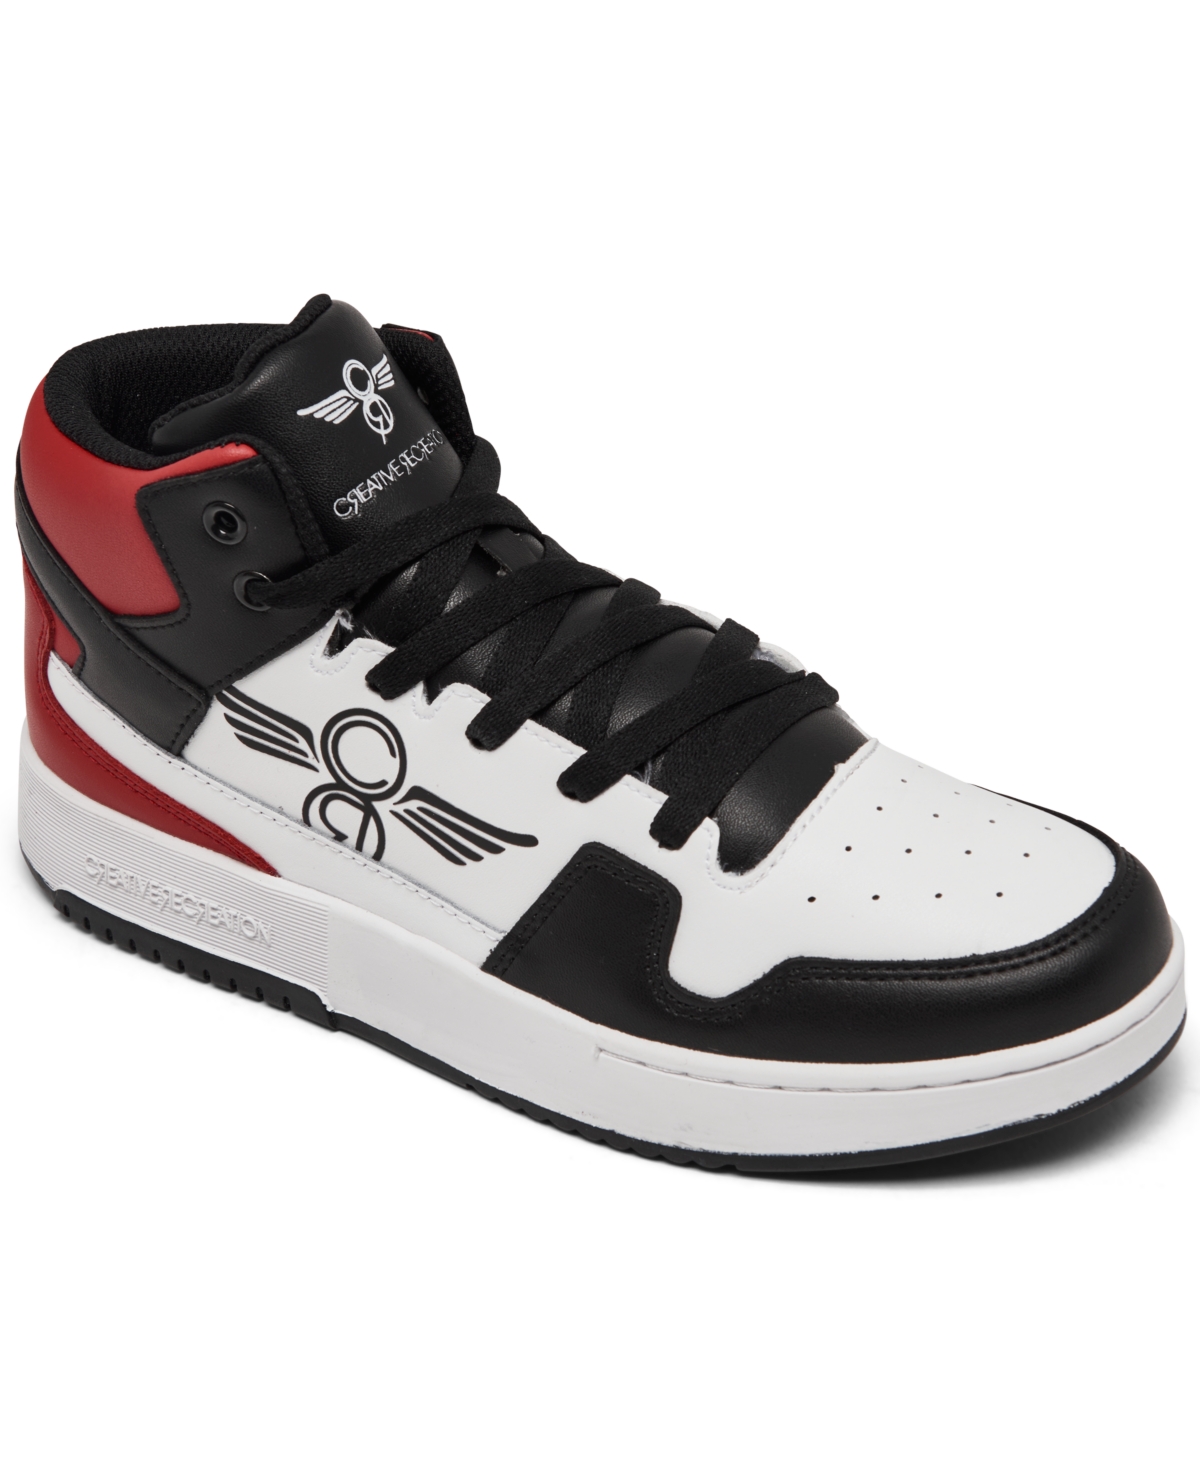 Women's Honey Mid Casual Sneakers from Finish Line - White, Black, Red